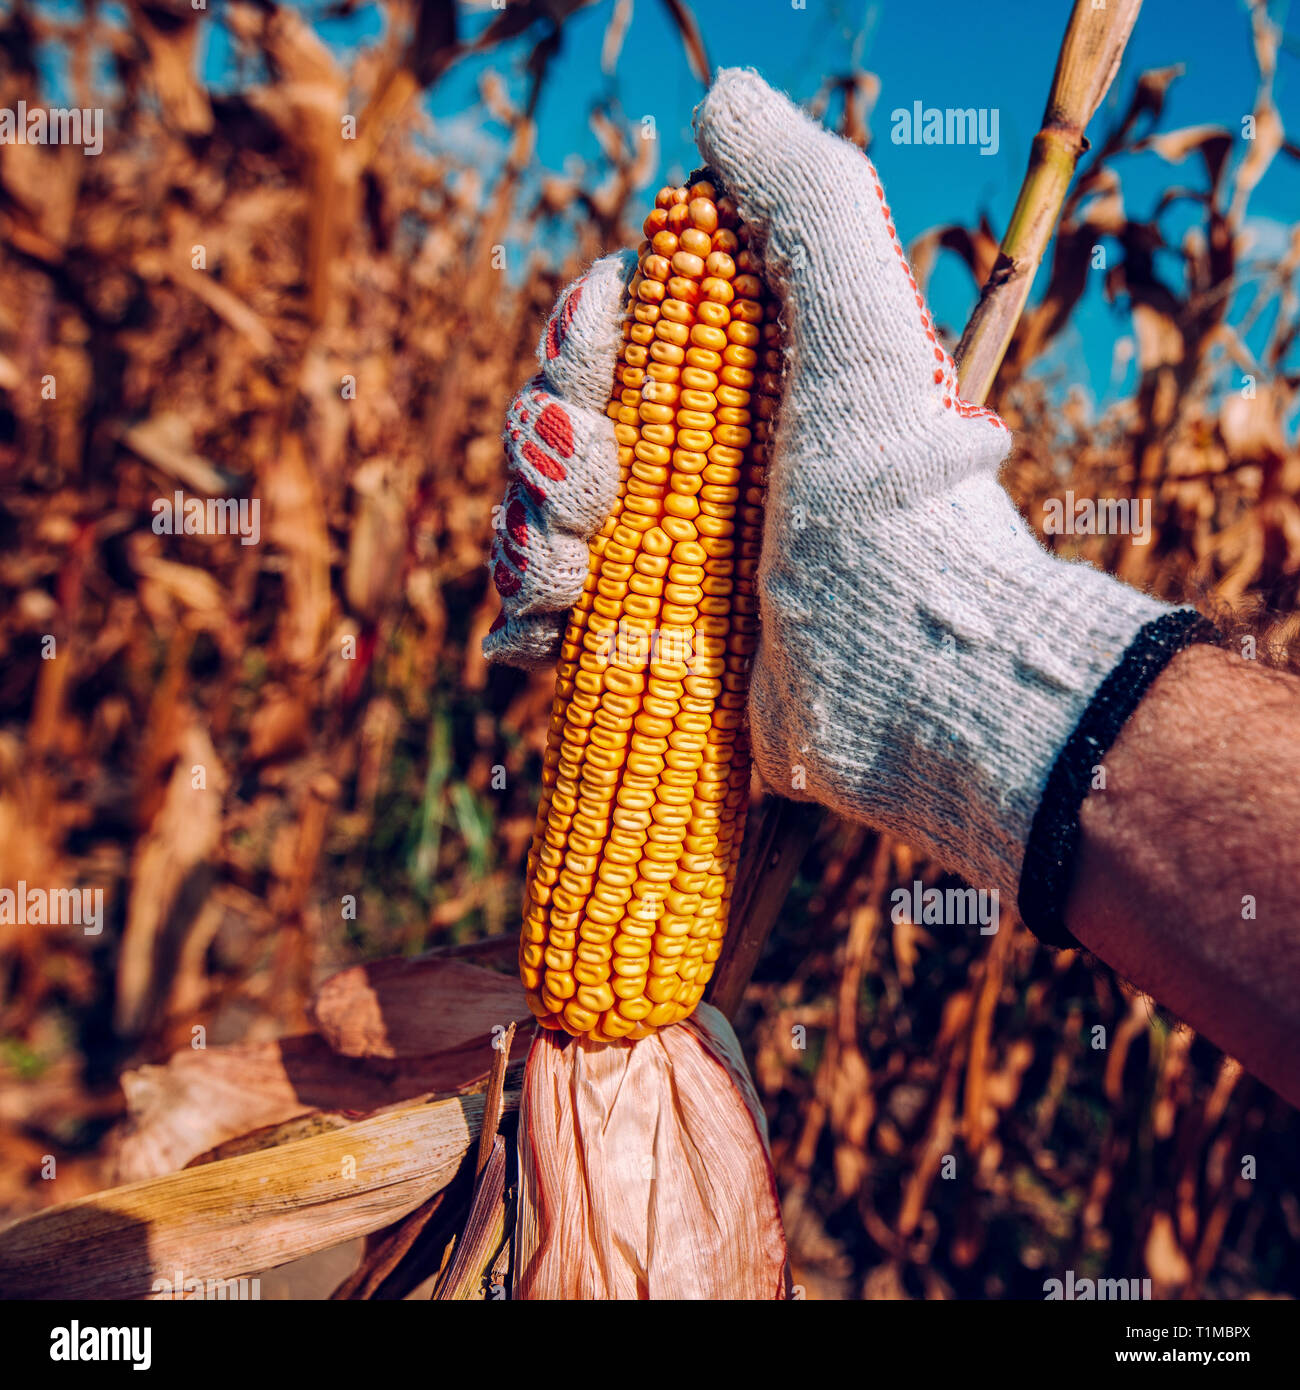 Hand picking corn cobs in field. Farm worker harvesting ripe maize crops by hands. Stock Photo